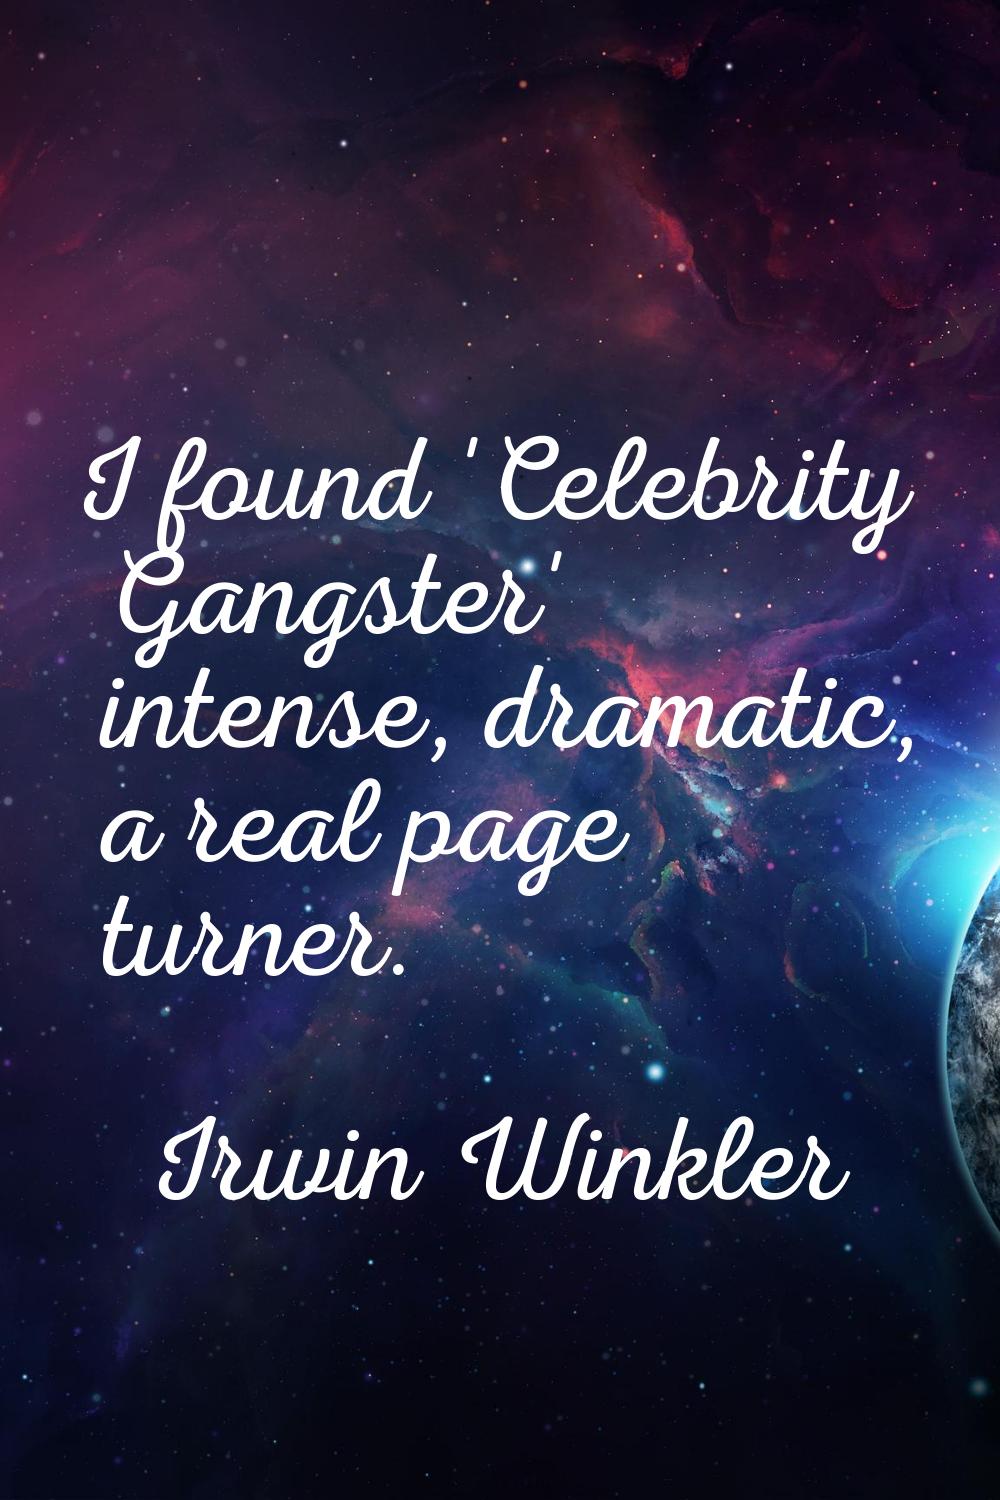 I found 'Celebrity Gangster' intense, dramatic, a real page turner.